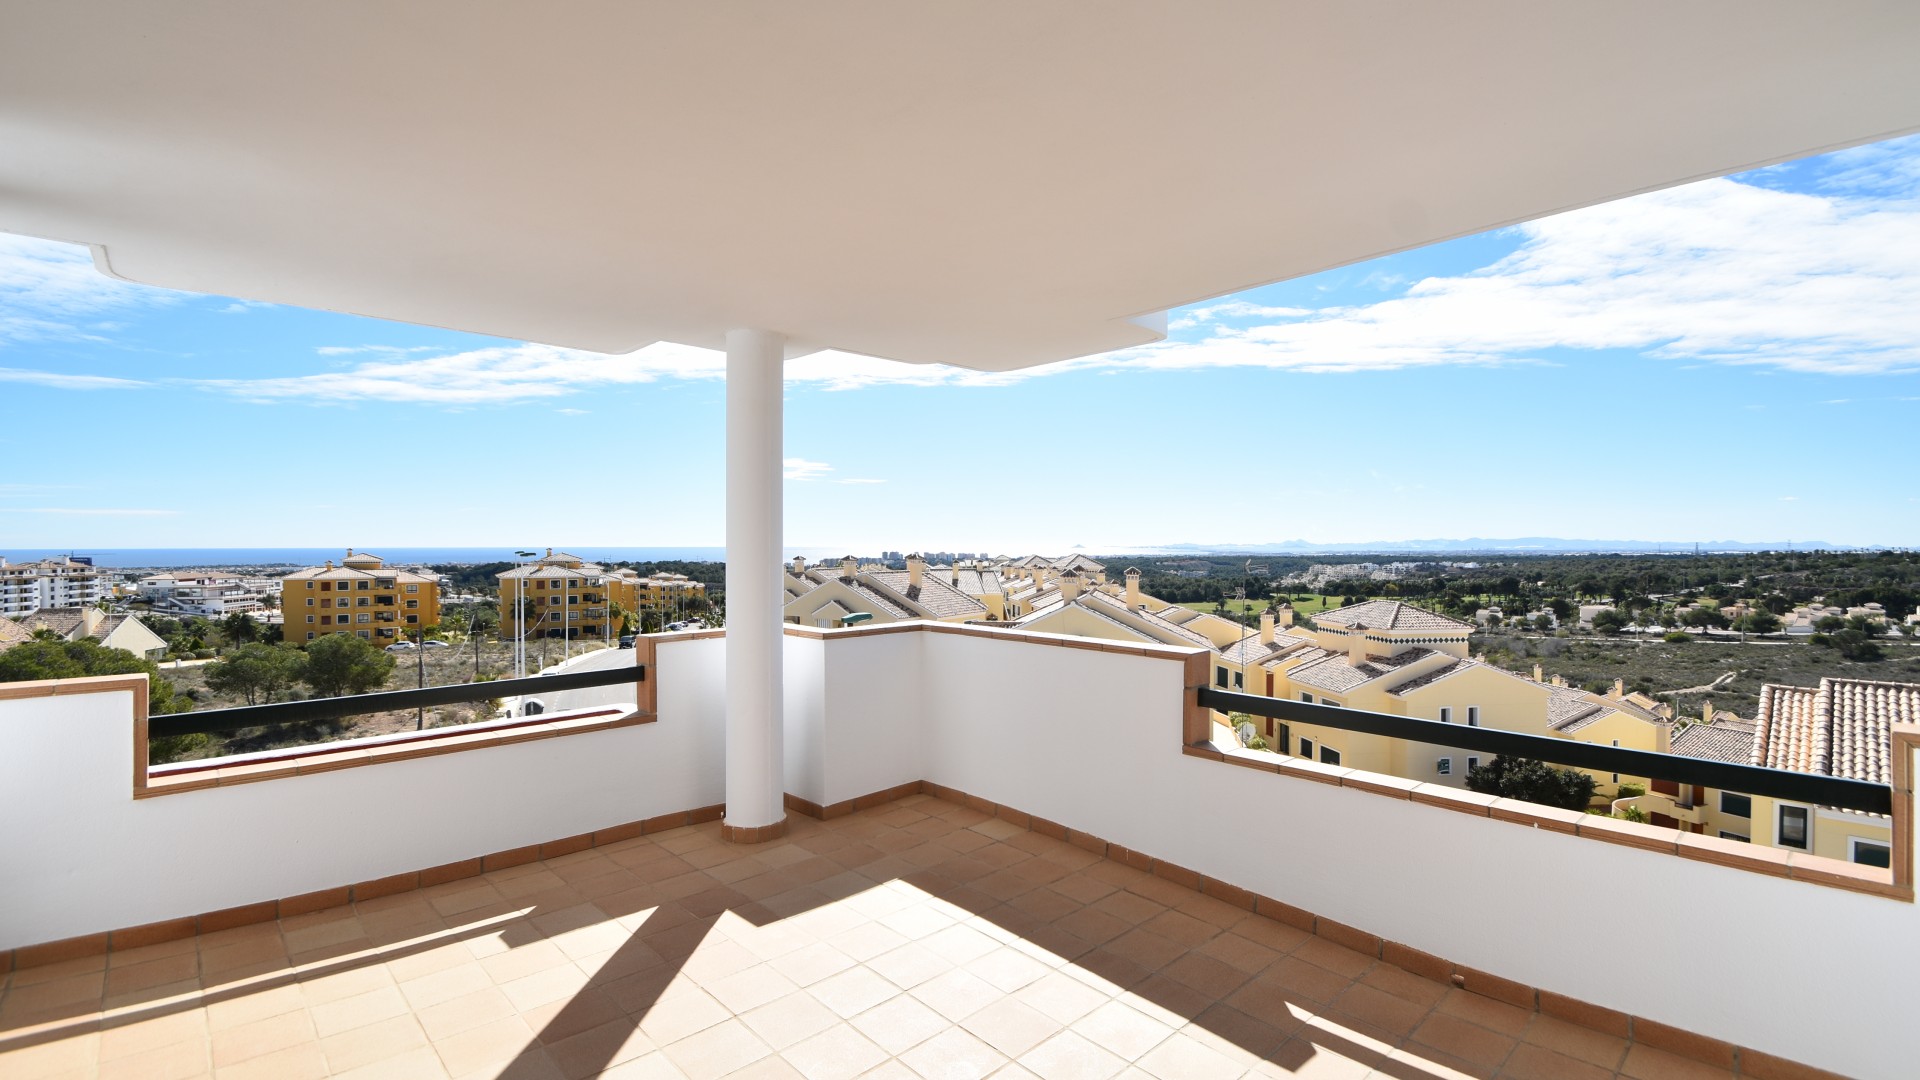 Apartment / flat in Campoamor